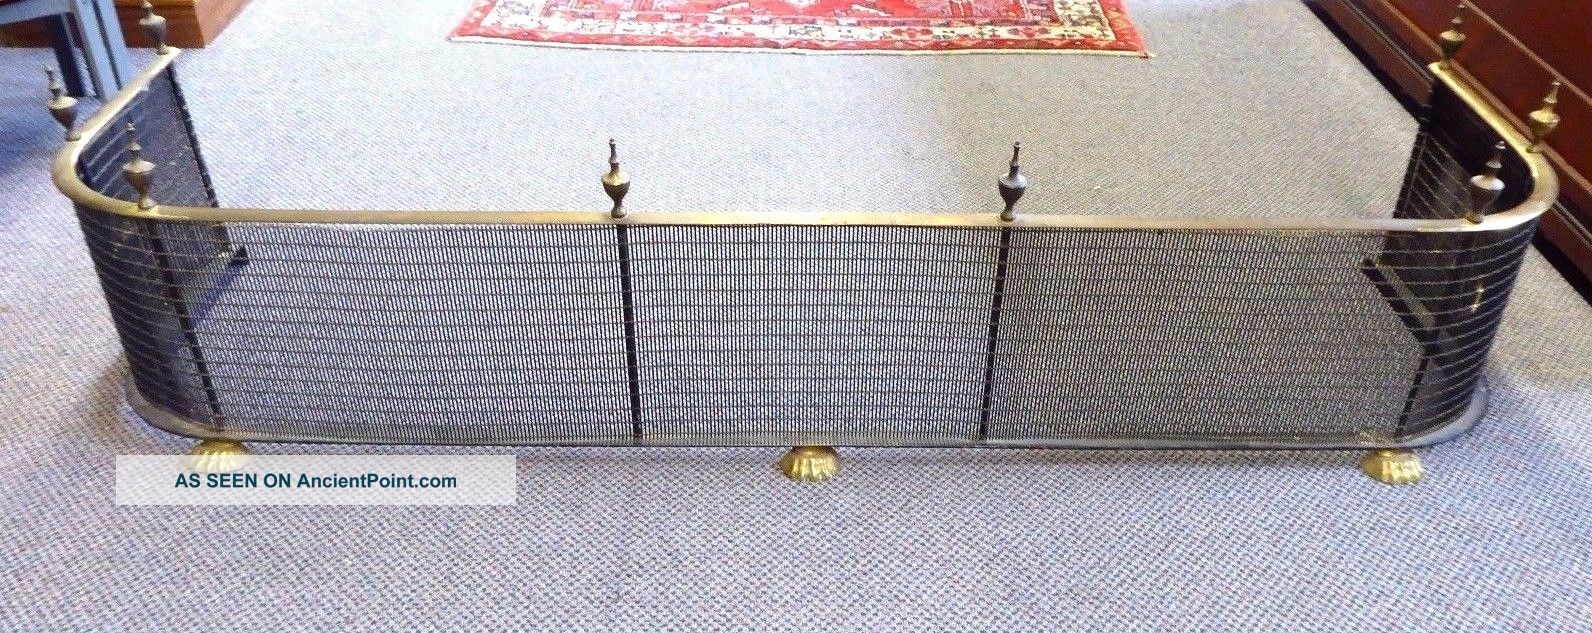 Antique Fire Place Skirt Fender.  Brass.  3 Paw Feet.  Wire Mesh.  Posts&finials.  1880 Hearth Ware photo